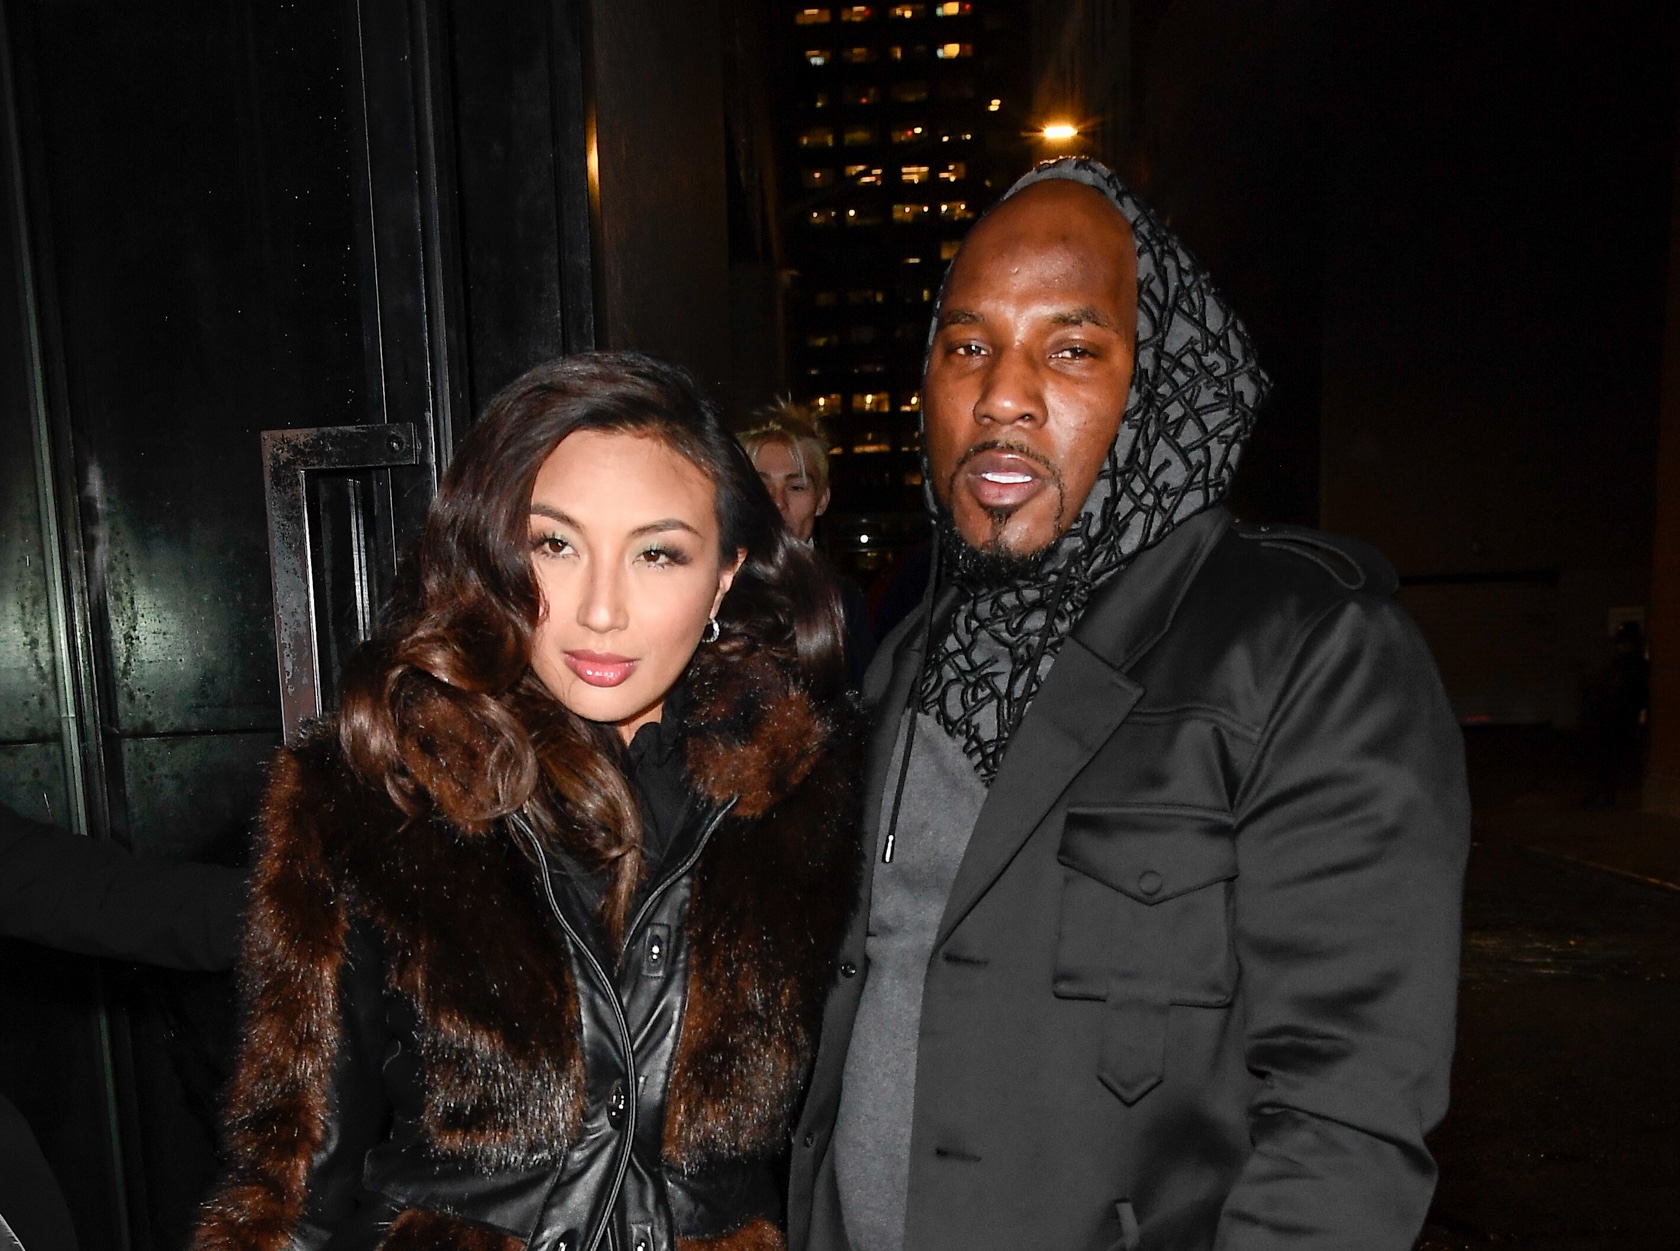 Jeezy Accuses Jeannie Mai Of “Weaponizing” Their 2-Year-Old Daughter Amid Divorce